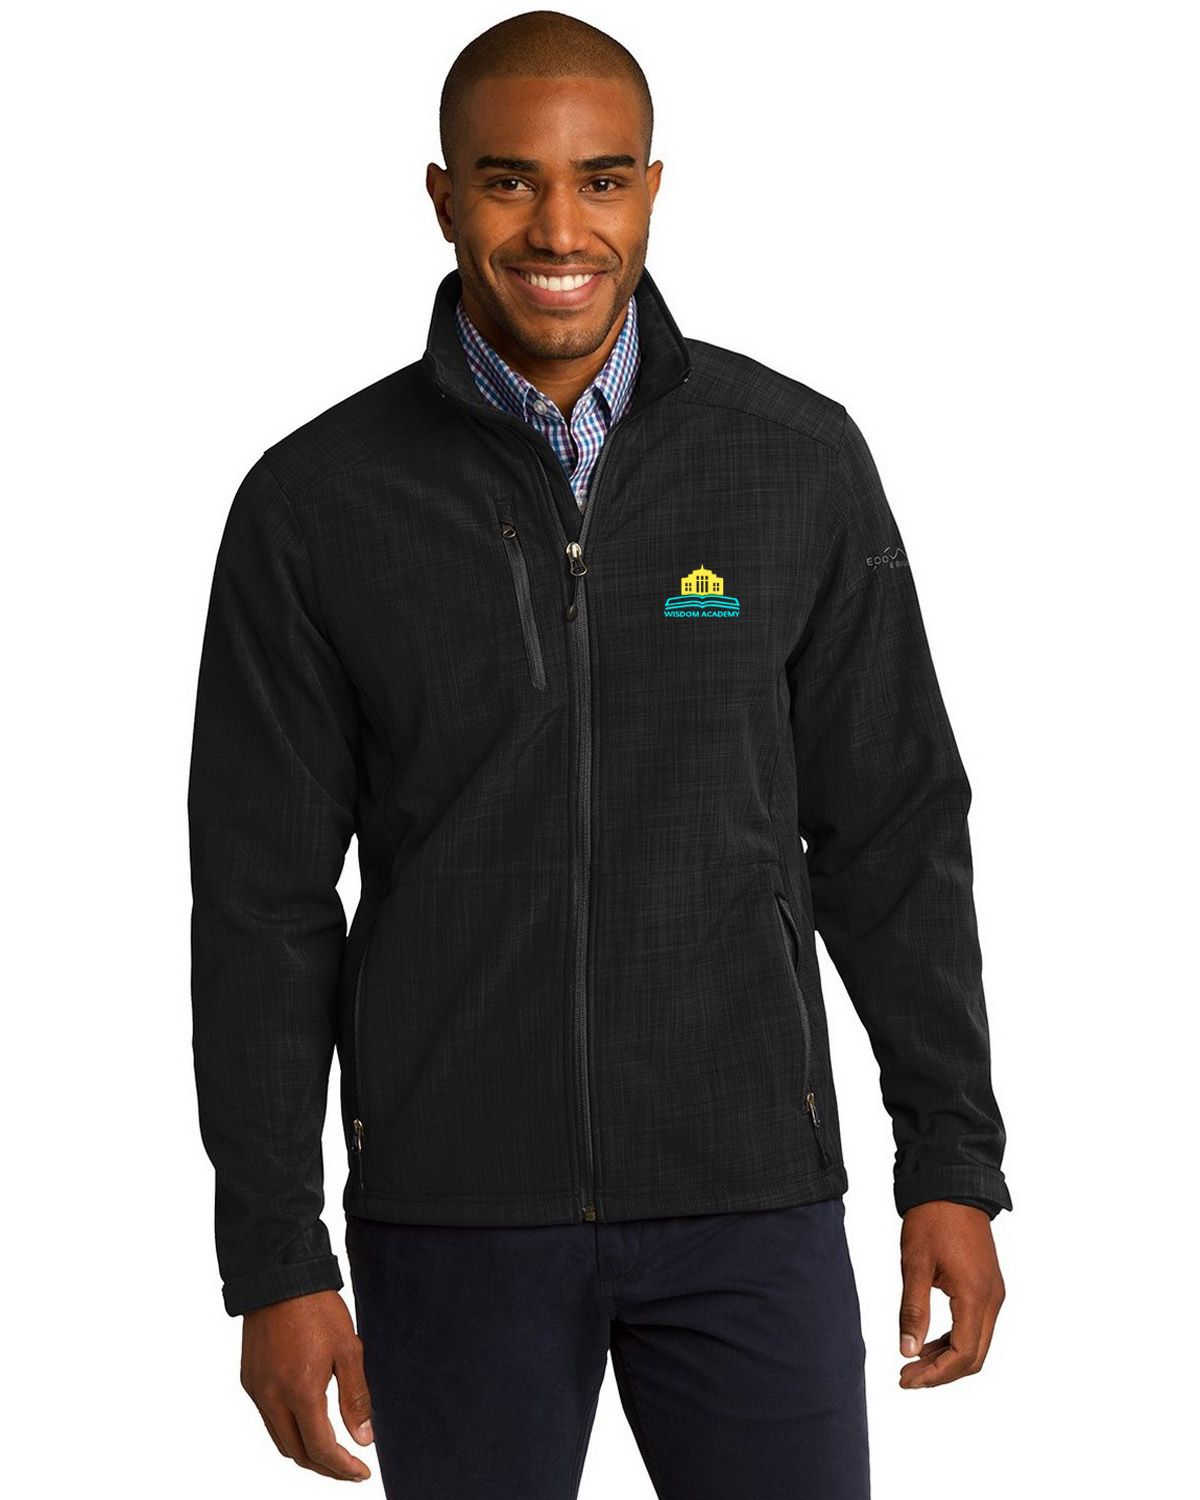 North End 88665 Men's Axis Soft Shell Jacket with Print Graphic